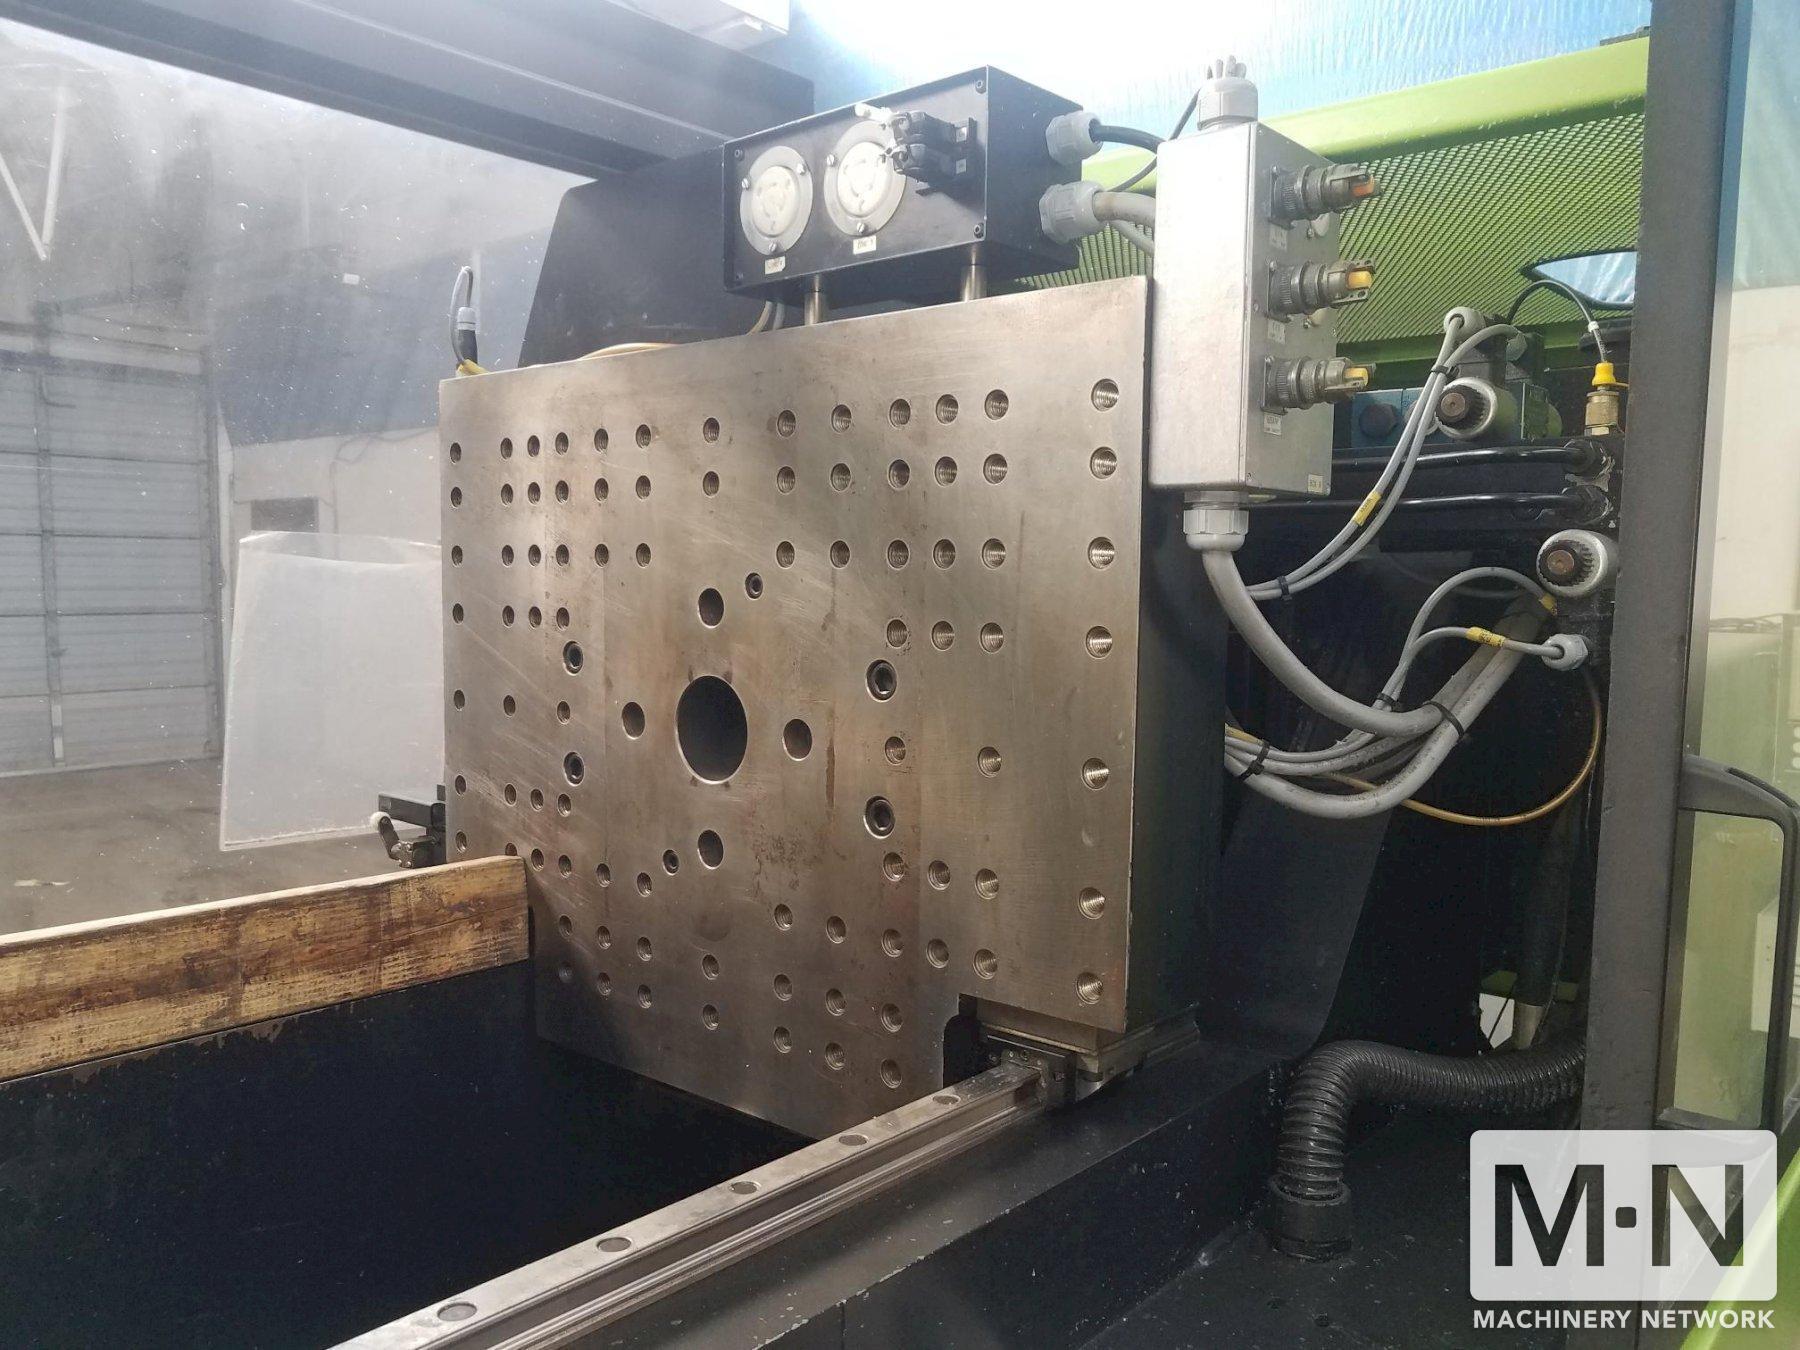 2003 ENGEL ES330/100  LIM SILICONE INJECTION MOLDING, HORIZONTAL/VERTICAL | Machinery Network Inc.